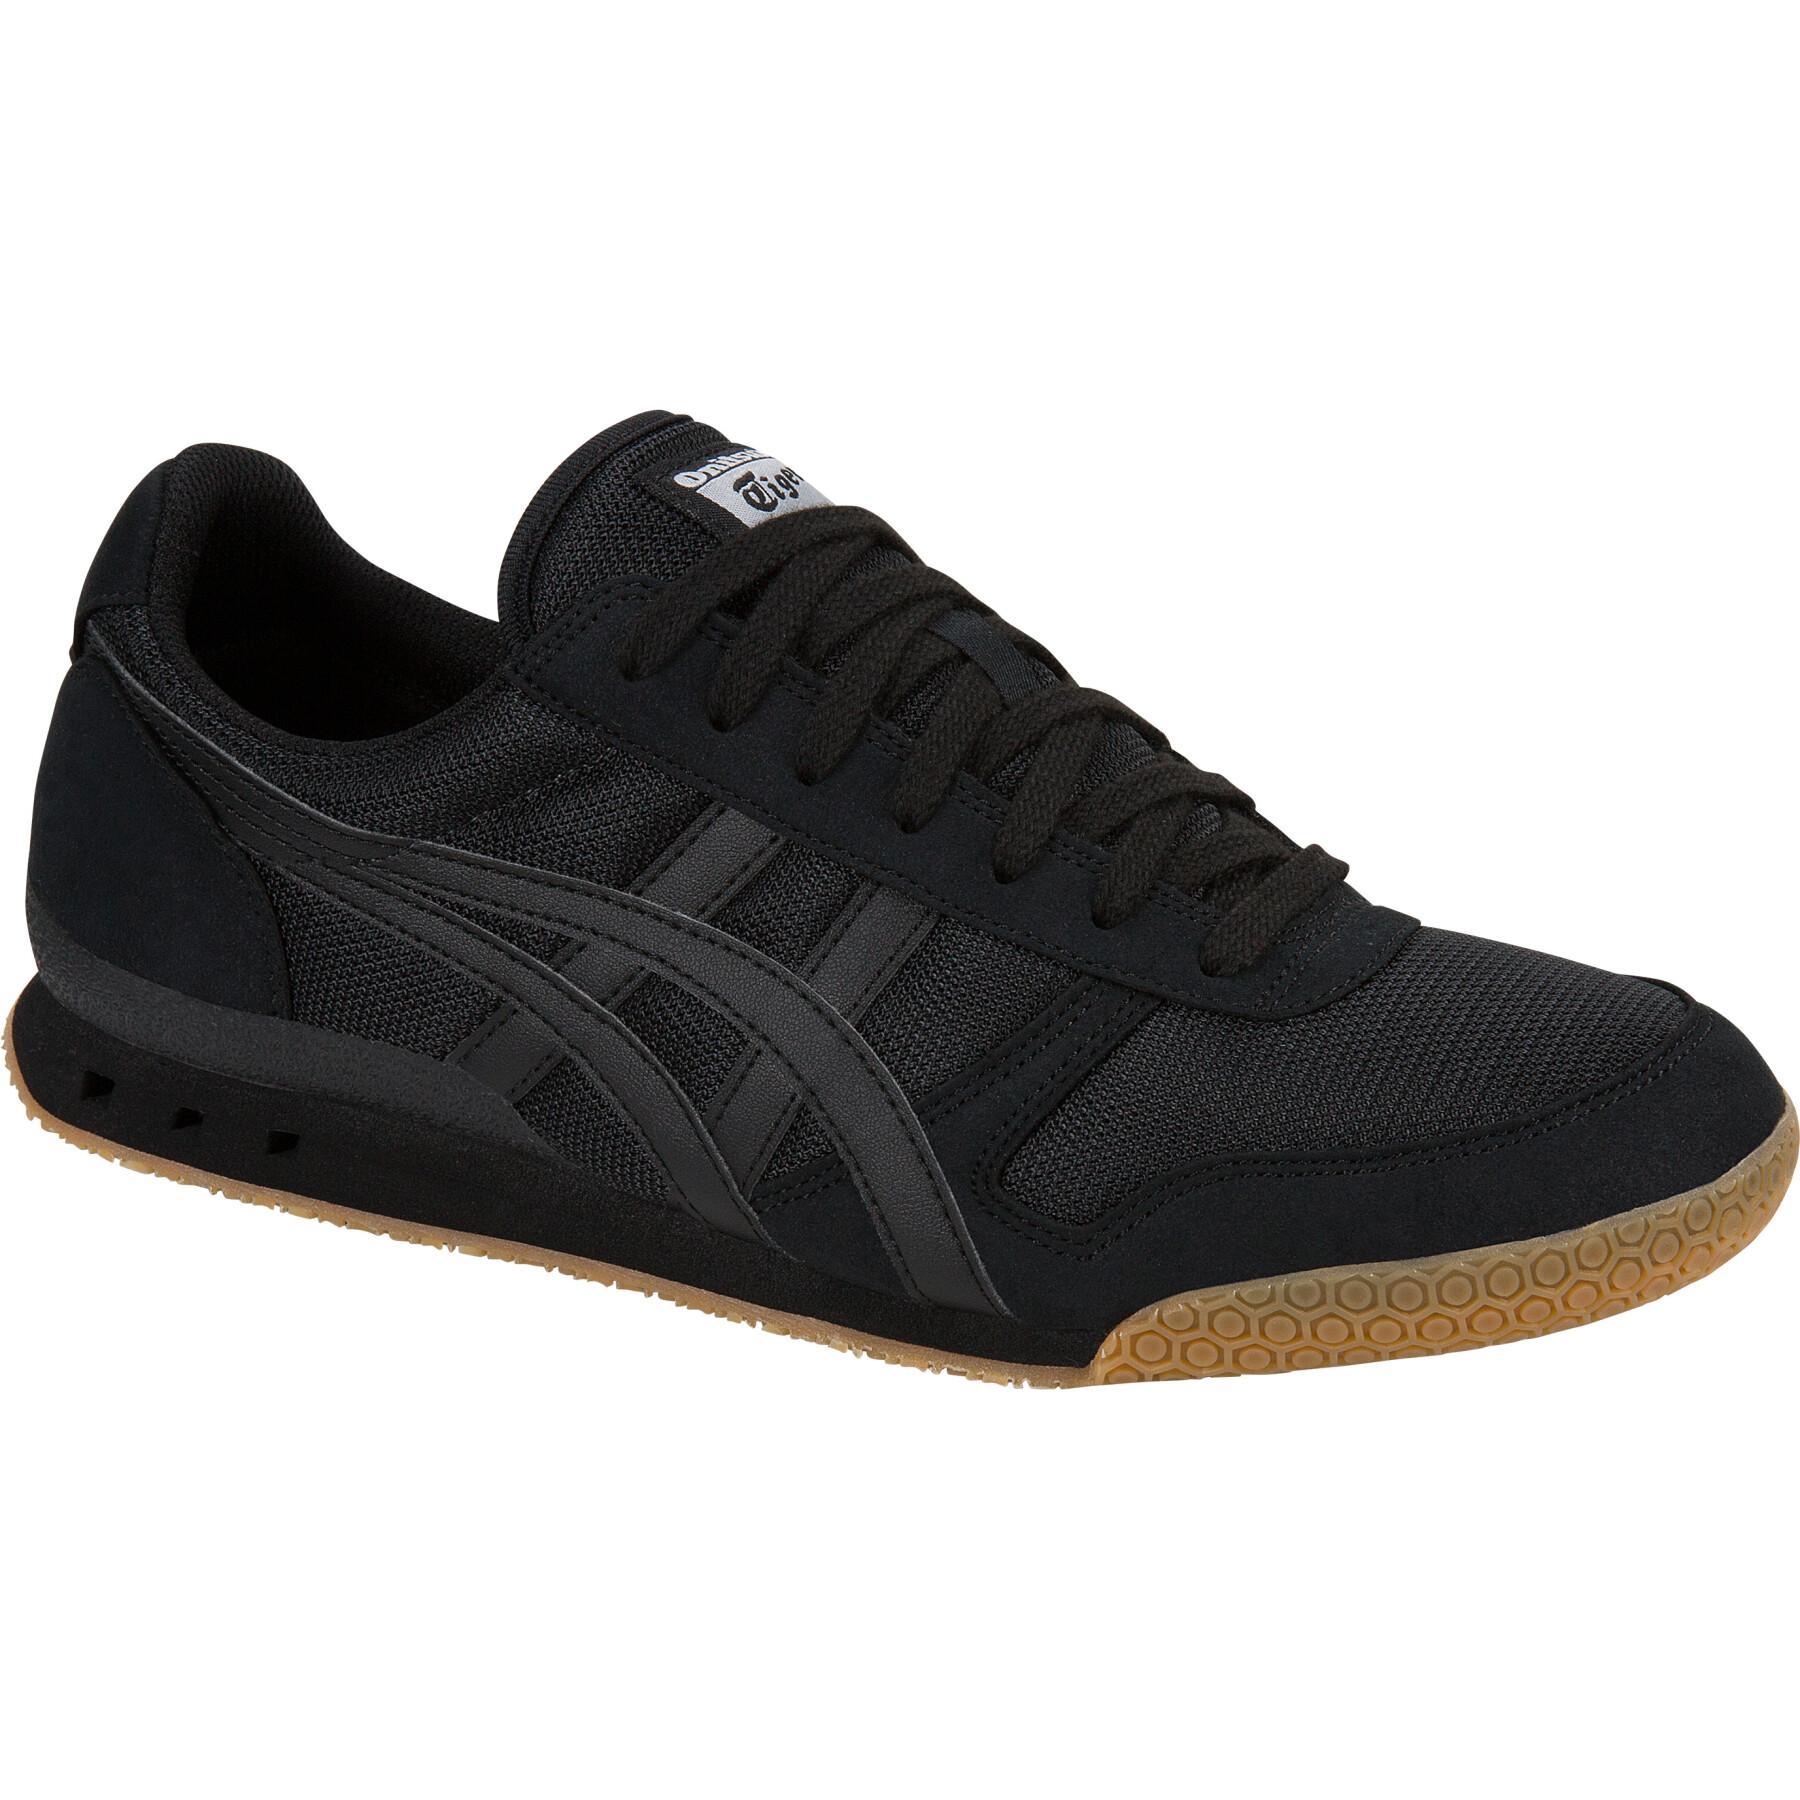 Trainers Onitsuka Tiger Traxy Trainer